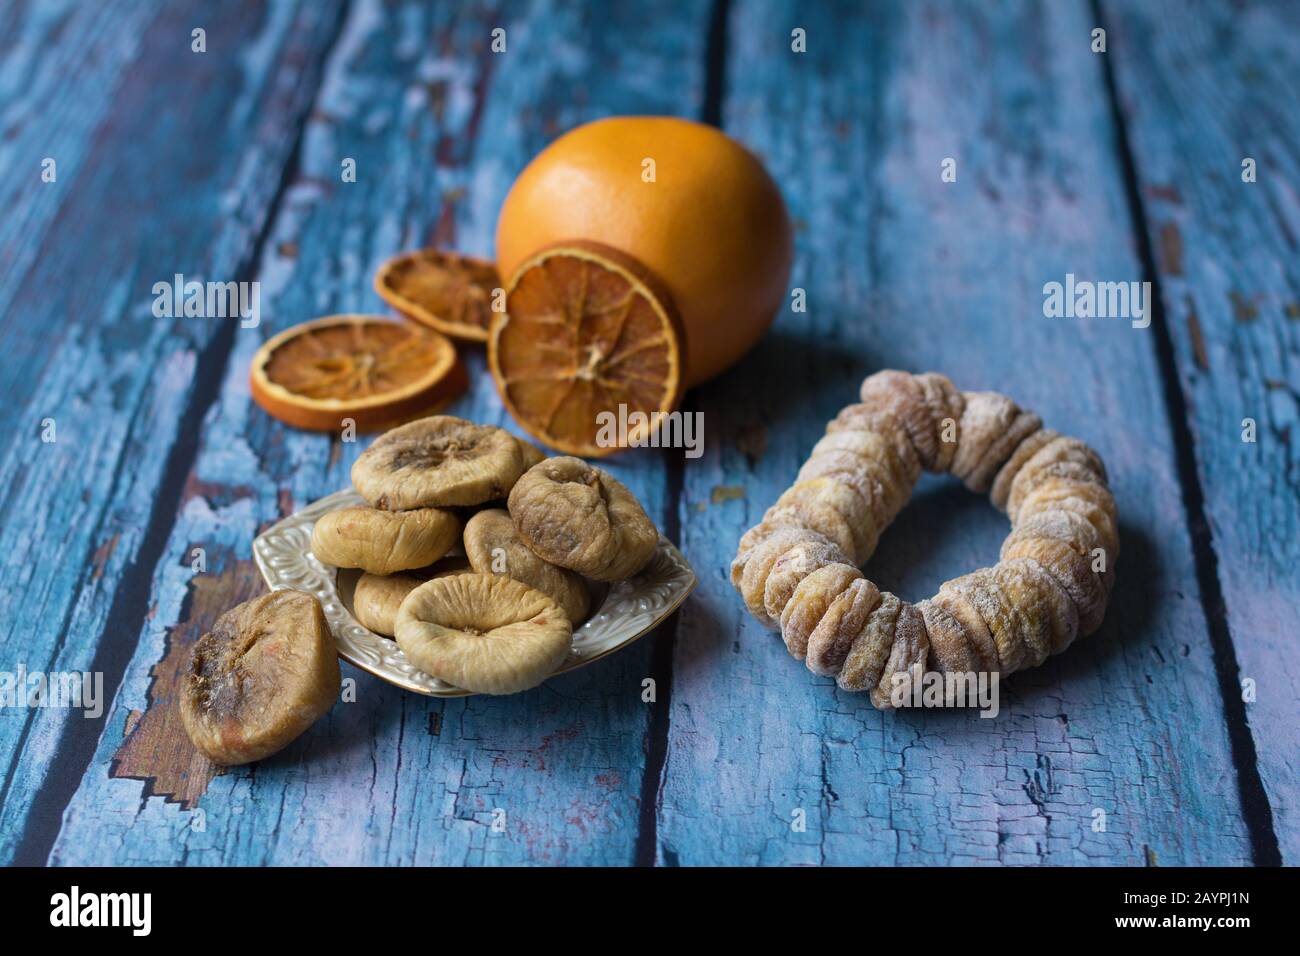 Sun-dried figs on a small plate. A dried fig wreath besprinkled with powdered sugar. A grapefruit and dried orange slices are in a blurry background. Stock Photo